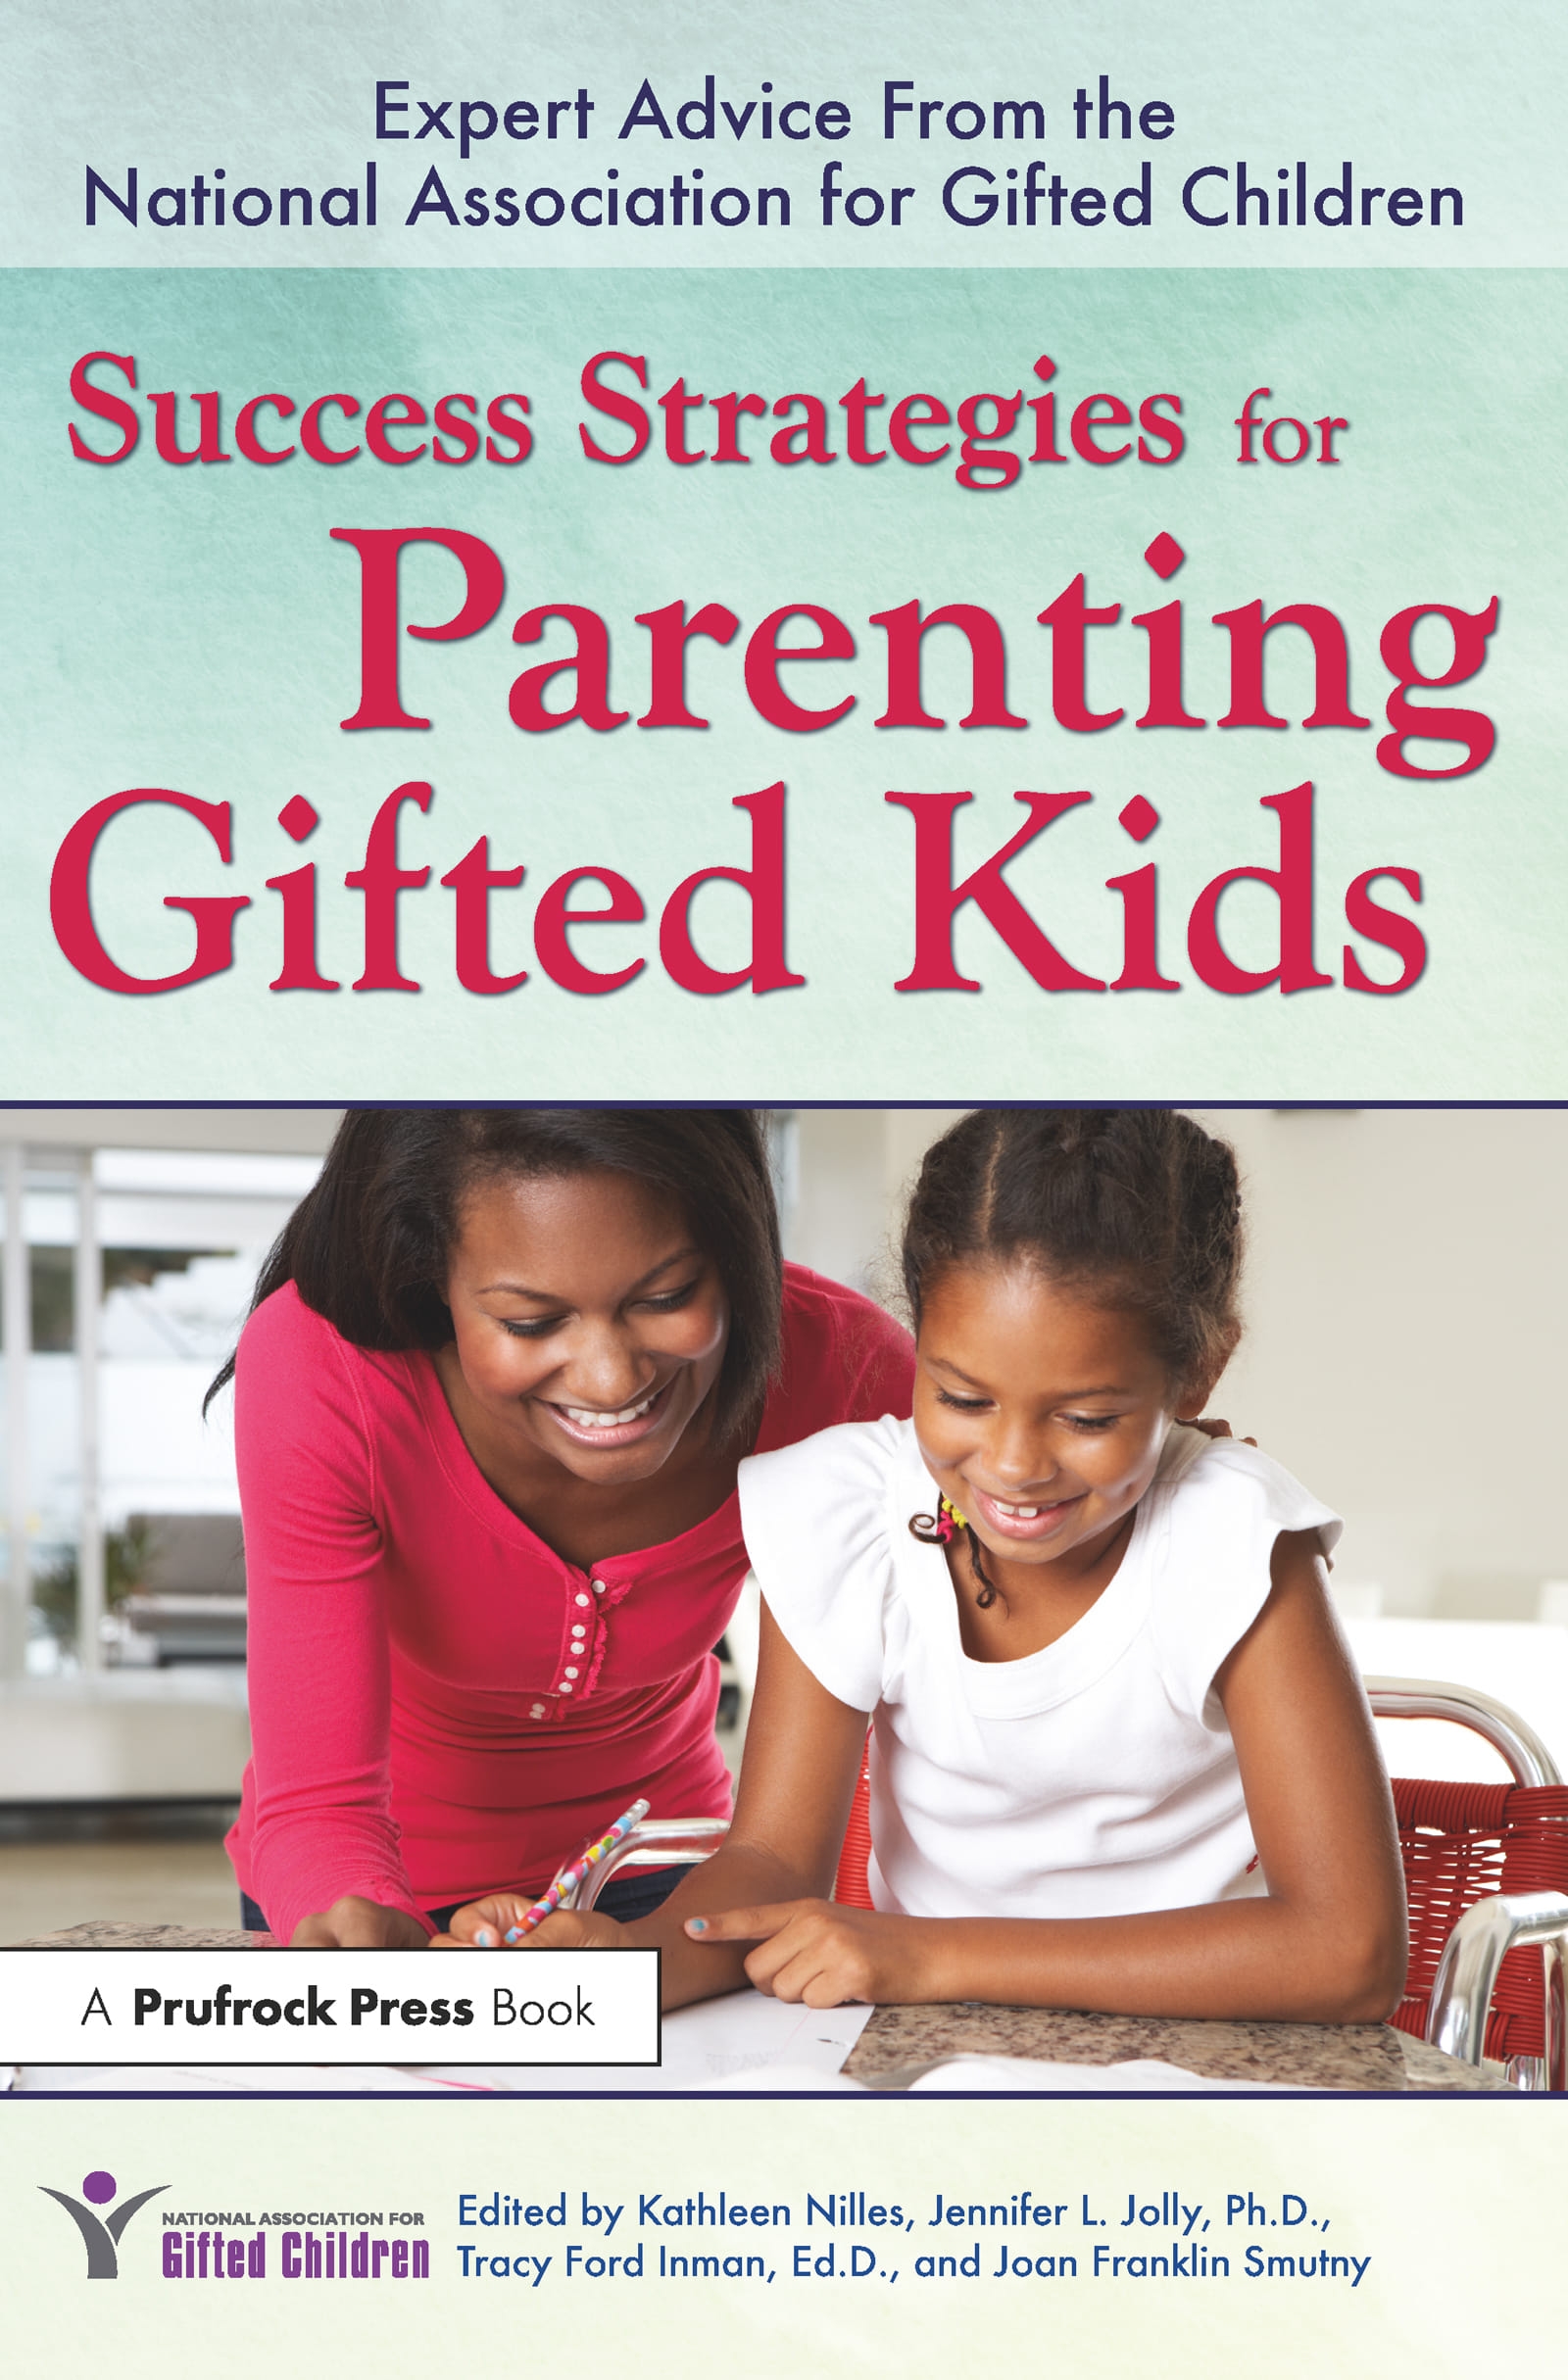 Success Strategies for Parenting Gifted Kids: Expert Advice from the National Association for Gifted Children